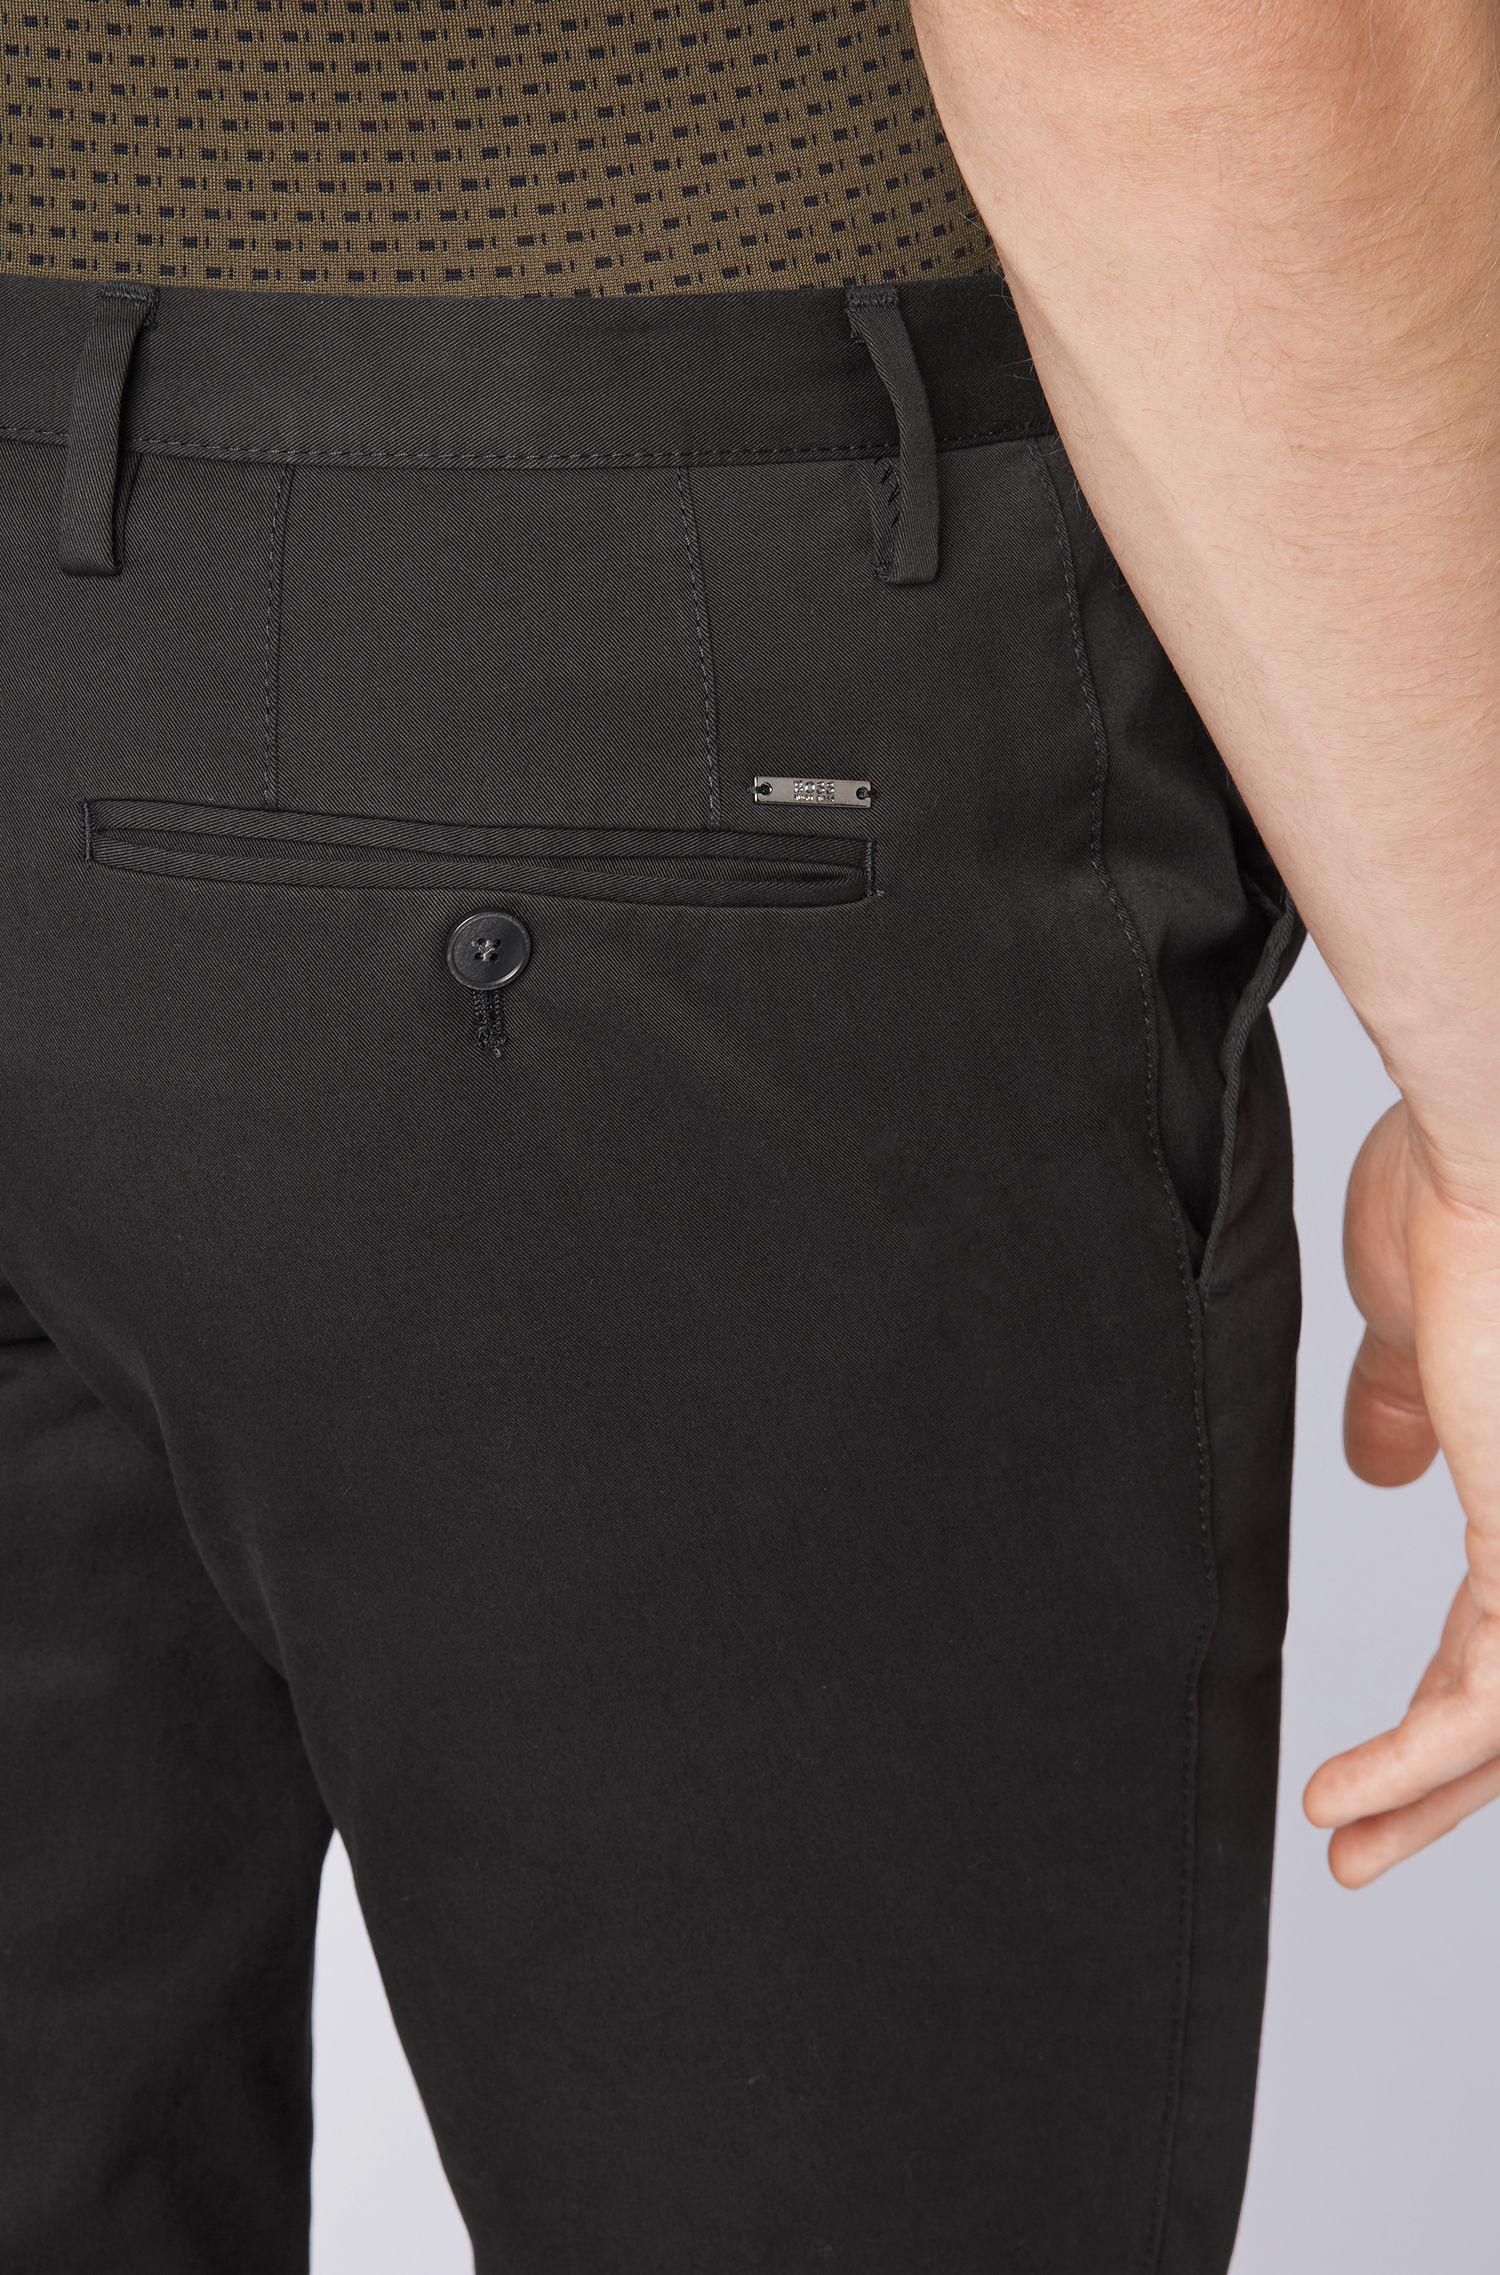 BOSS Slim-fit Pants In Garment-dyed Stretch Cotton in Black for Men - Lyst